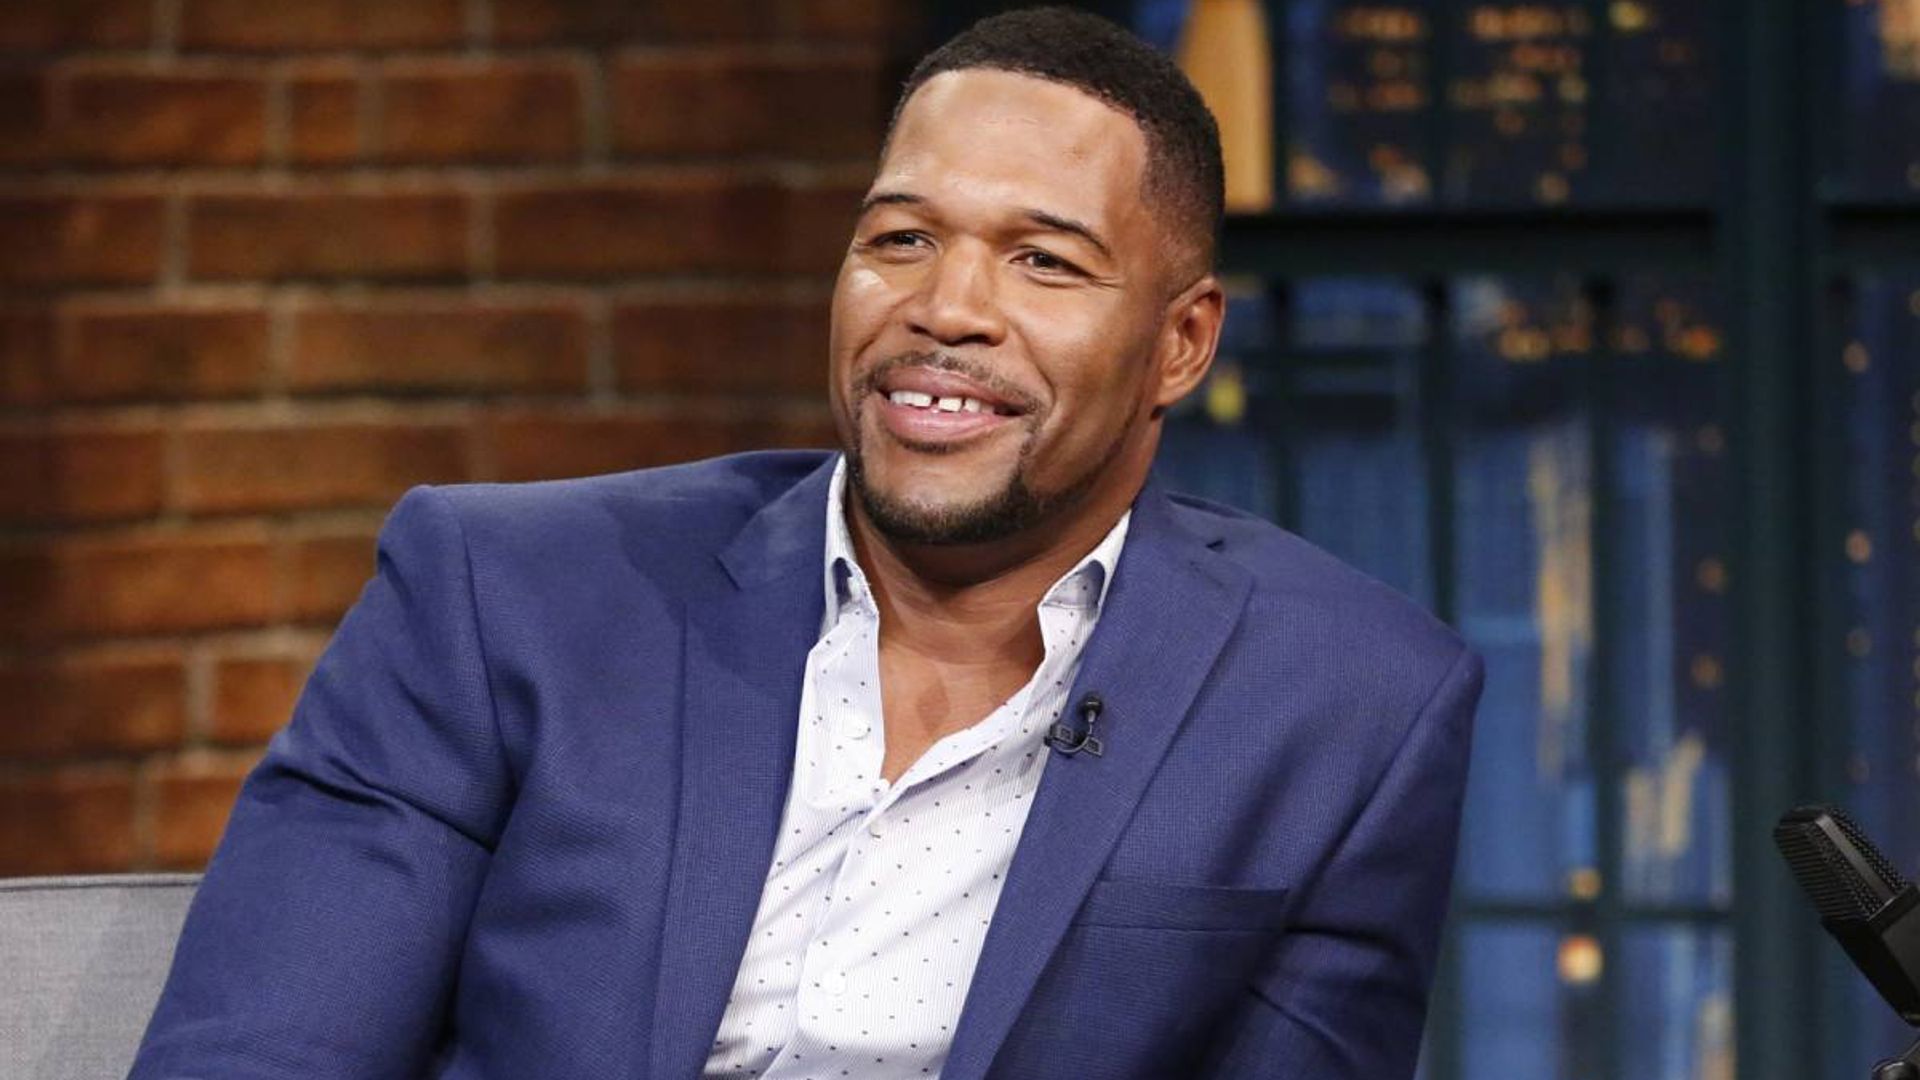 gma michael strahan sparks reaction